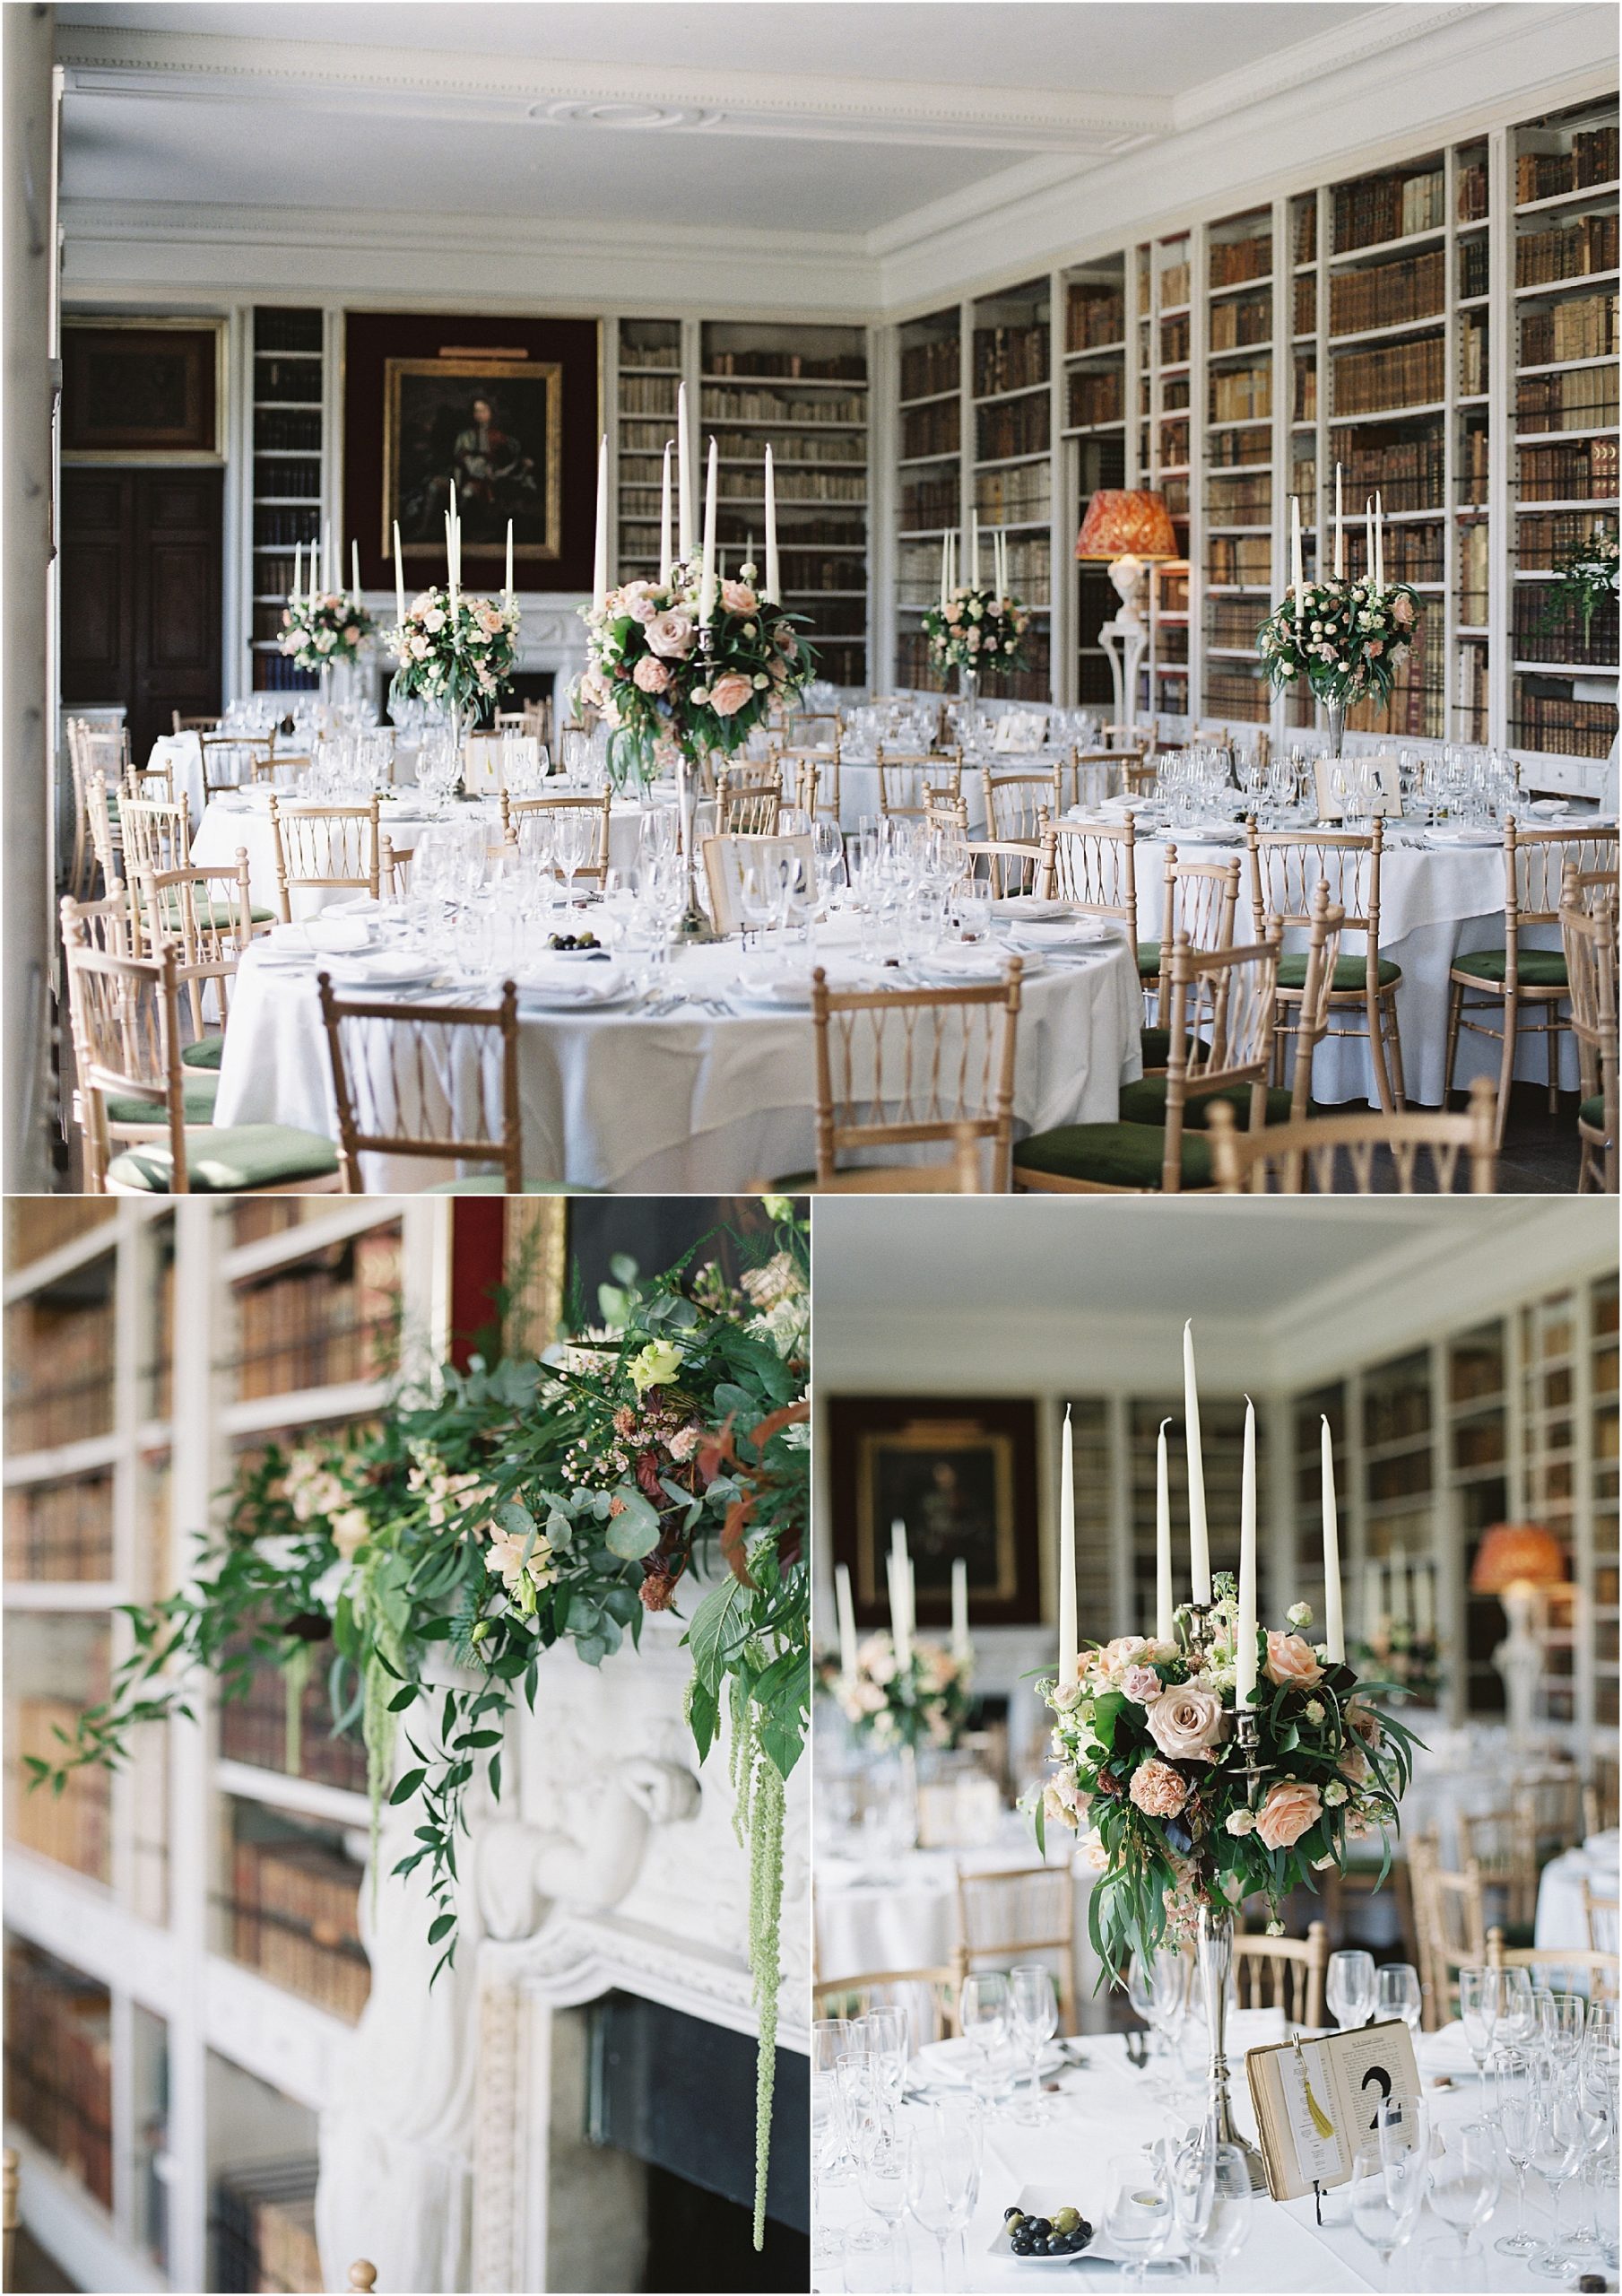 Wedding breakfast set up in the library at St Giles House Dorset